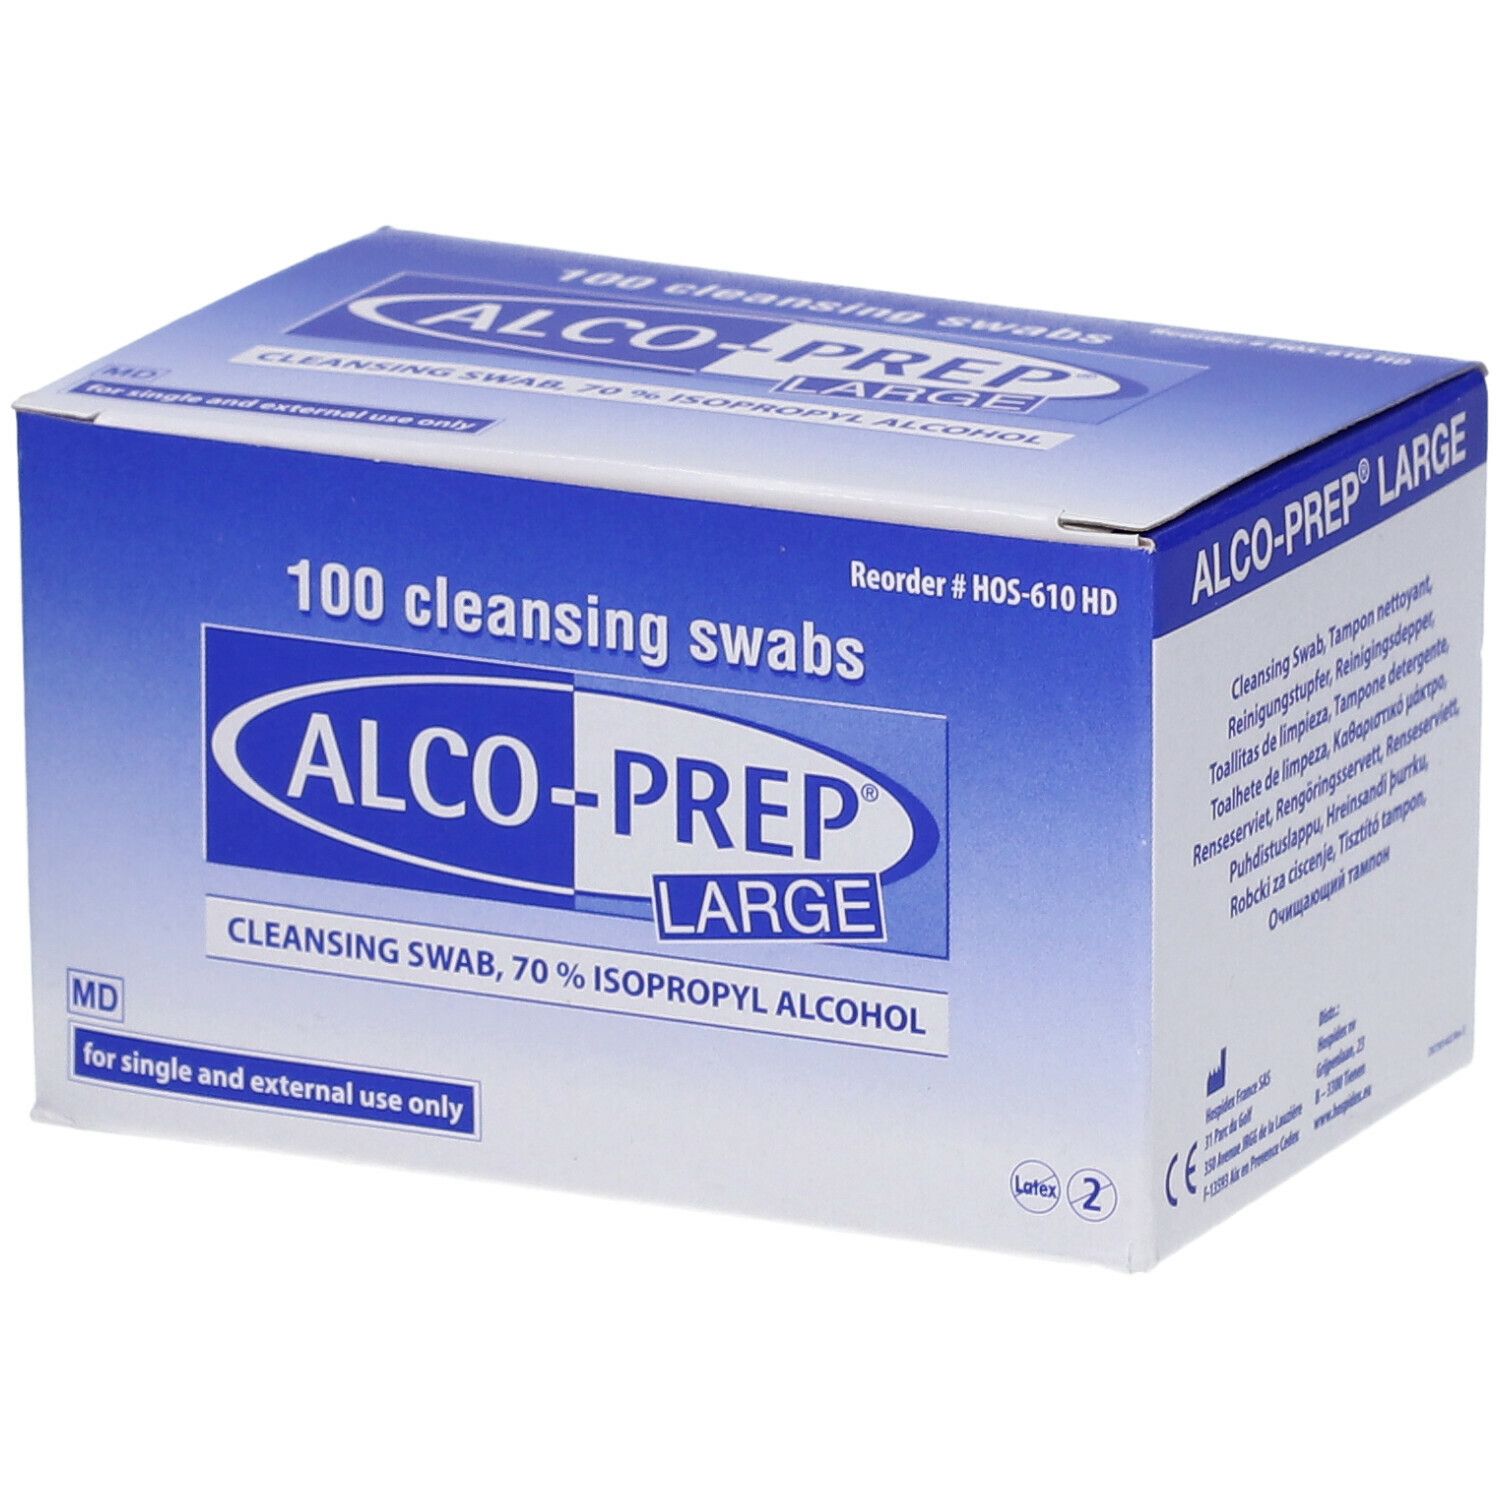 Alco-Prep® Large Tampons pre-injection